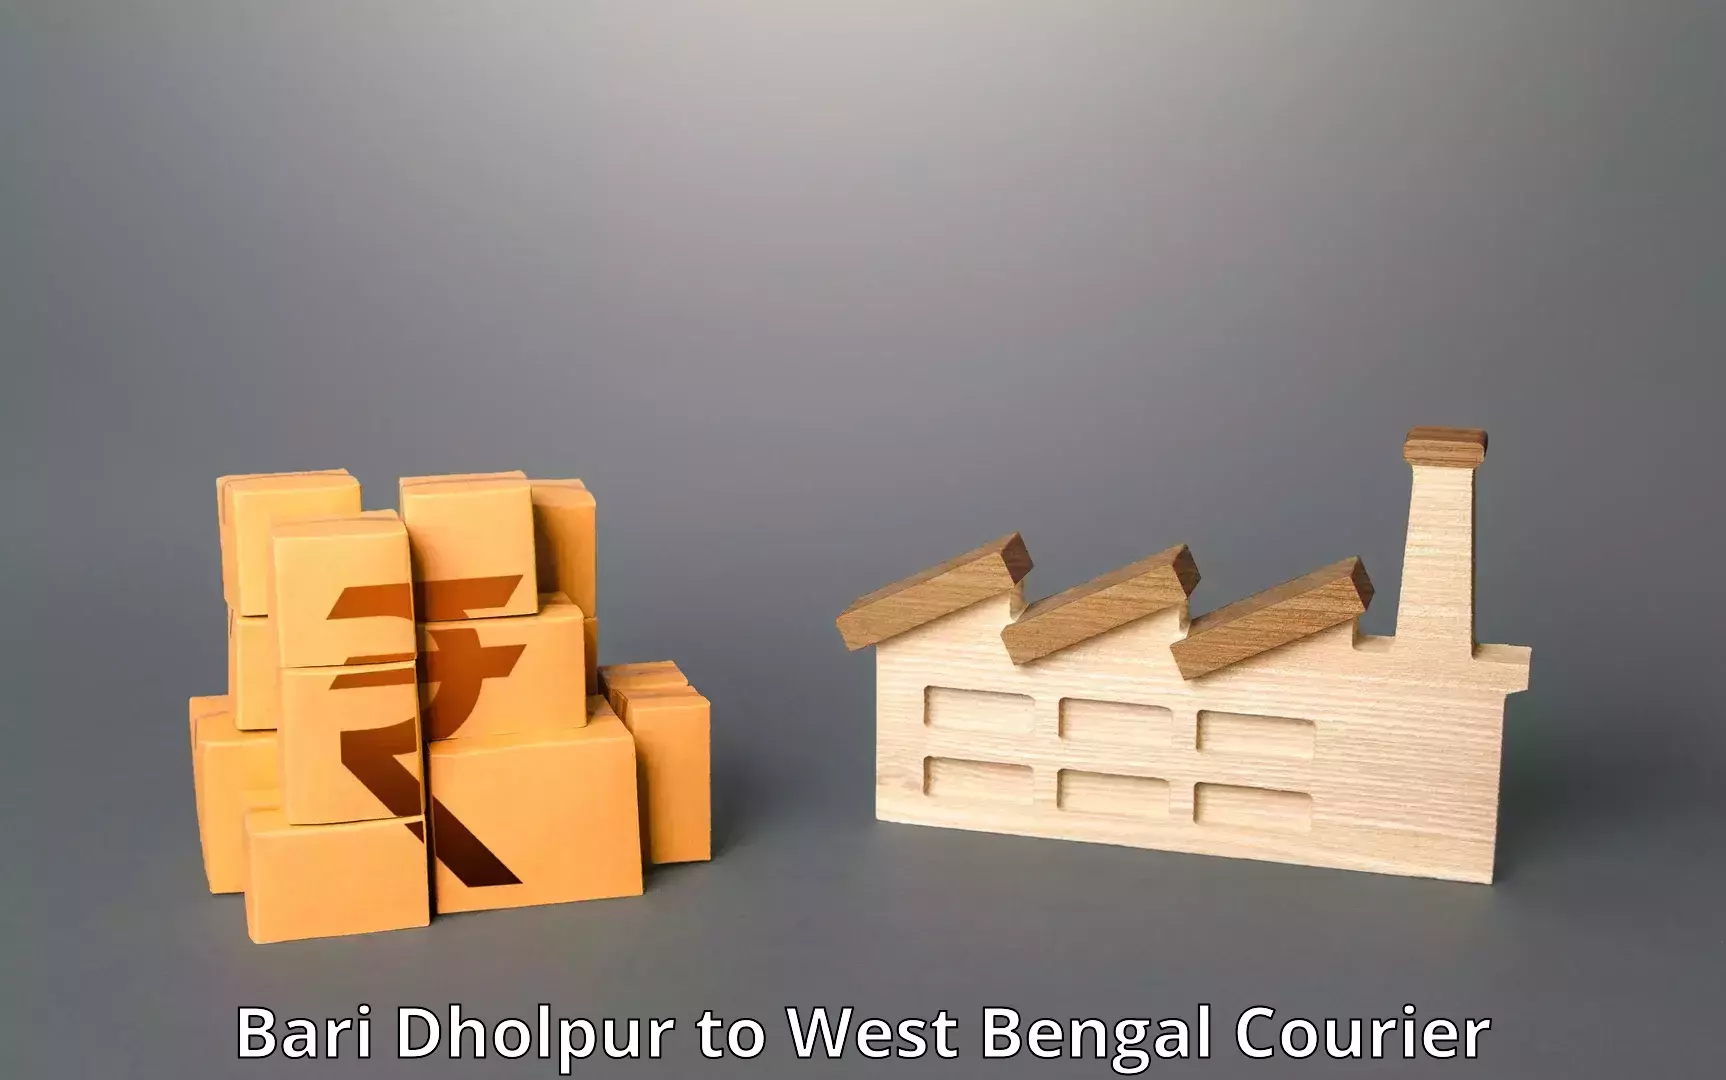 Quick courier services in Bari Dholpur to Kolkata Port